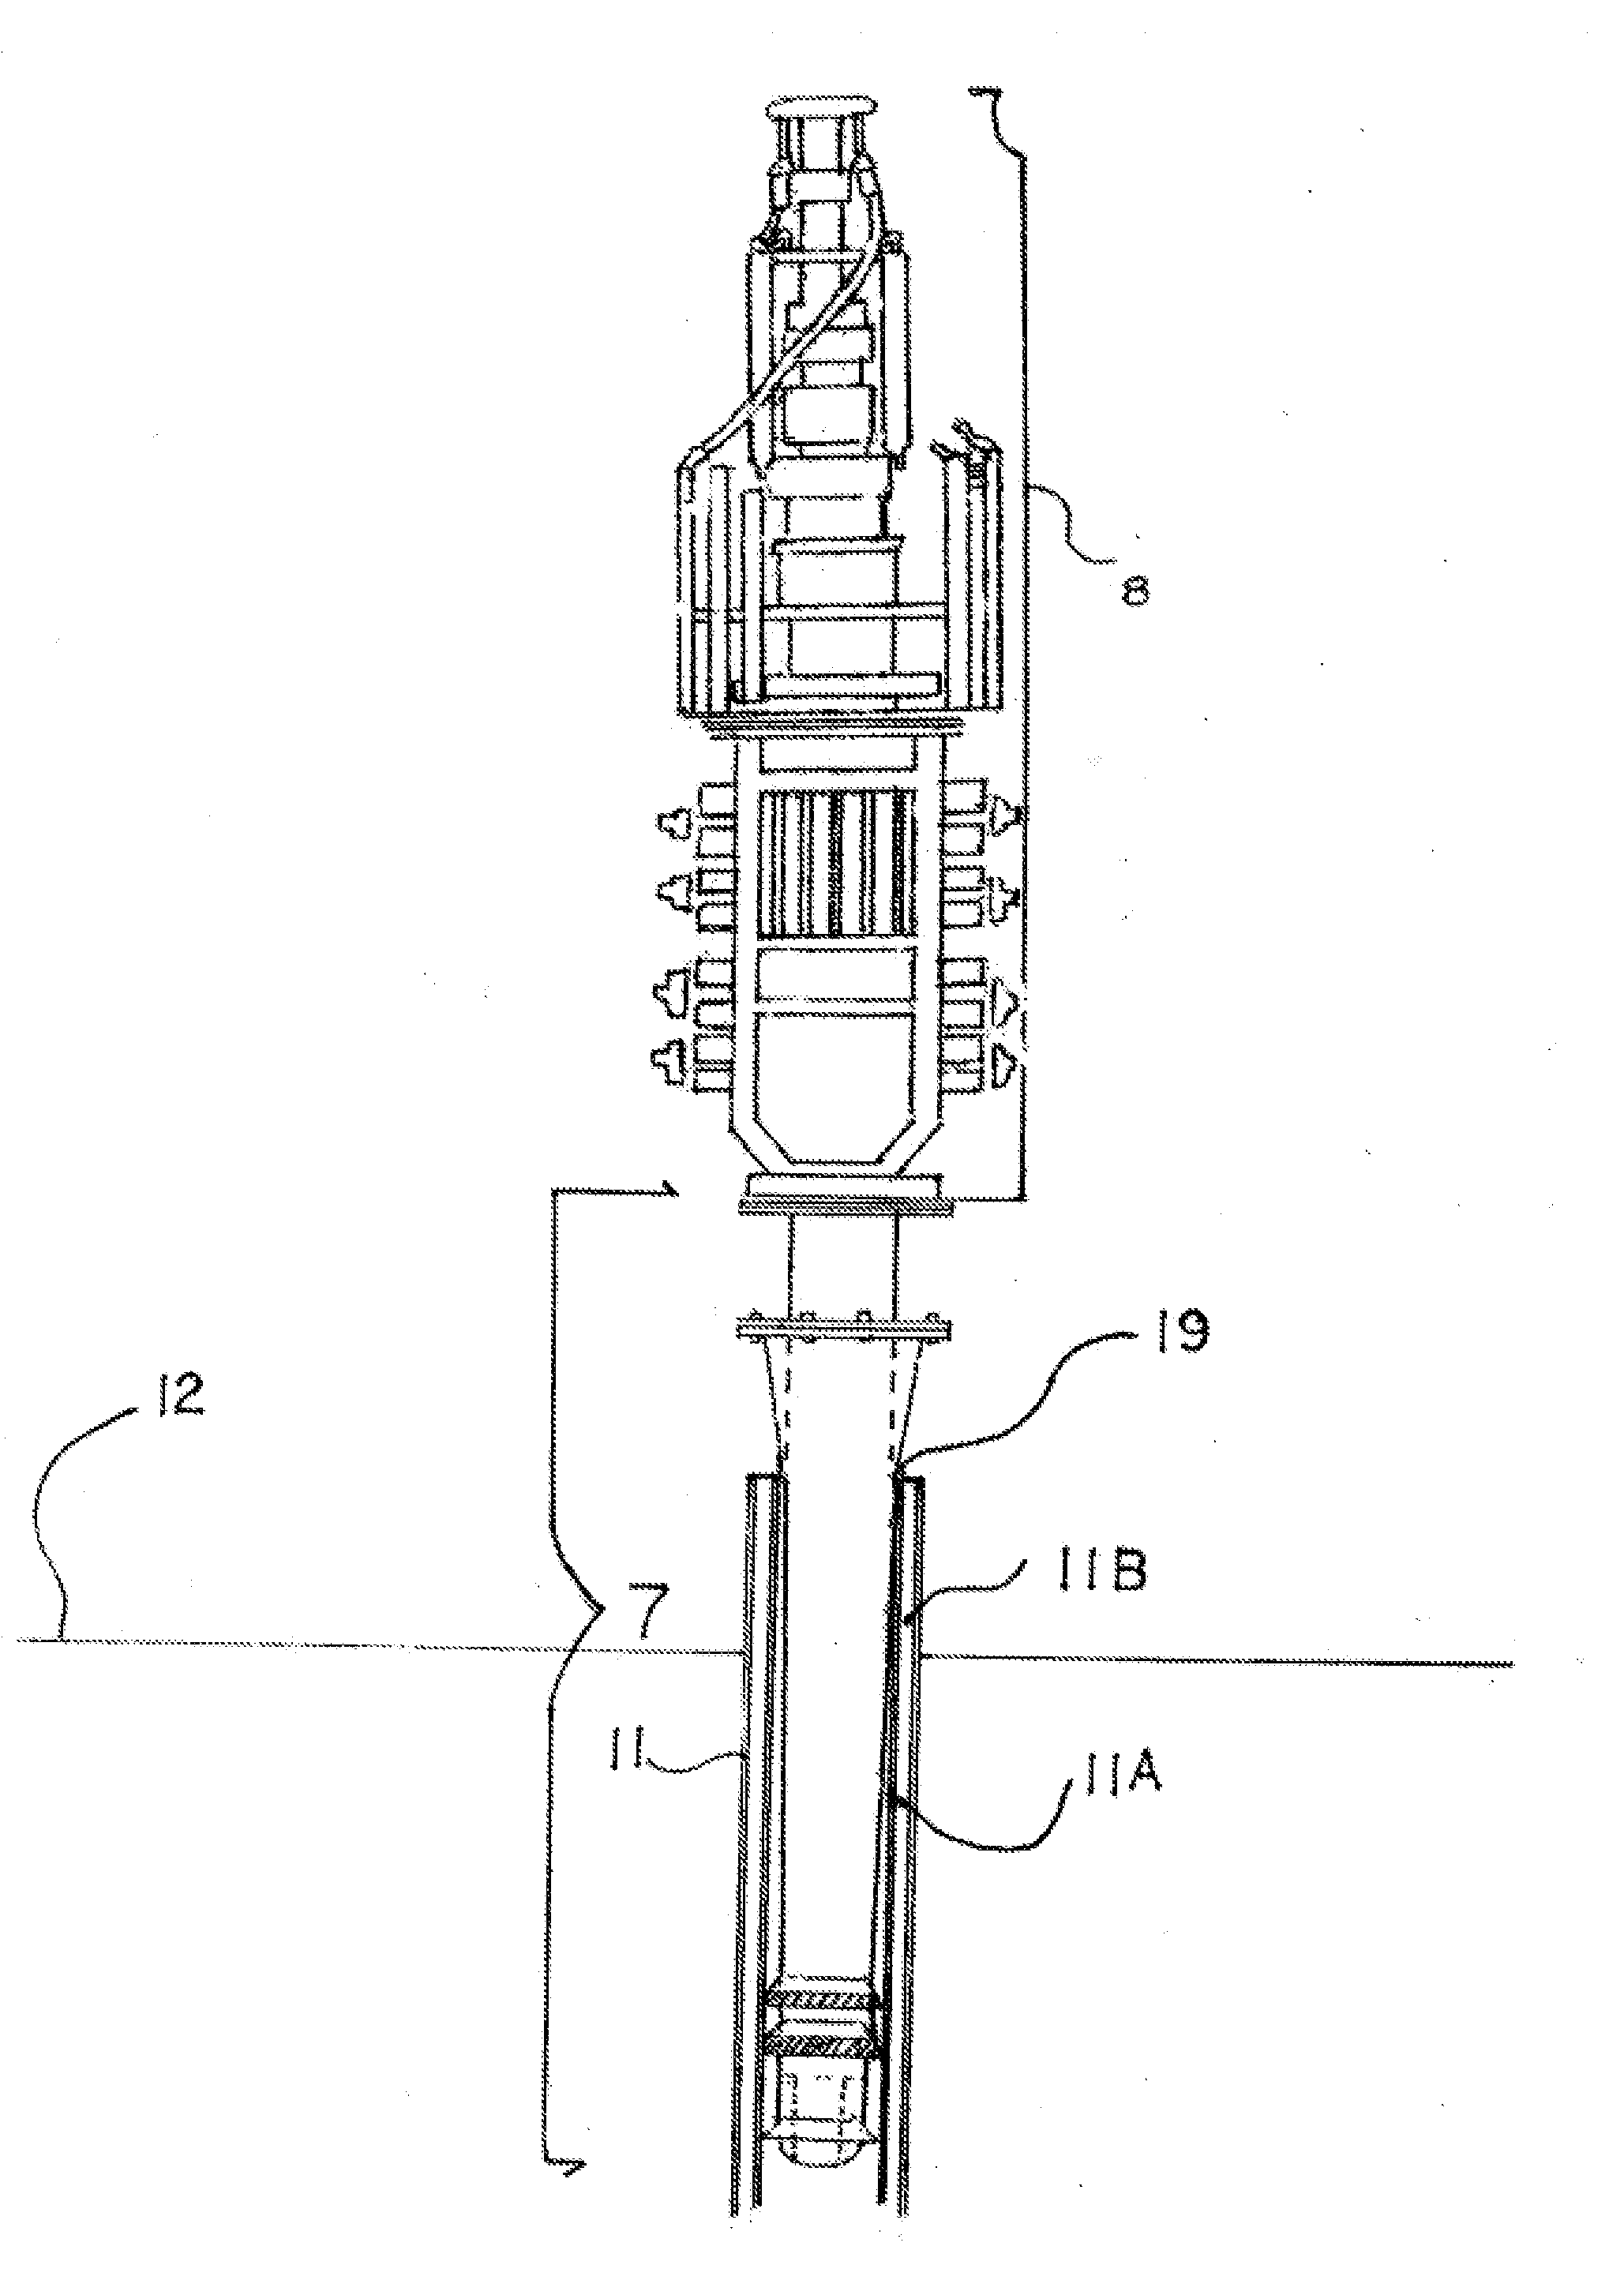 Lower emergency marine riser(LEMR) and method of installation preventing catastrophic product spills